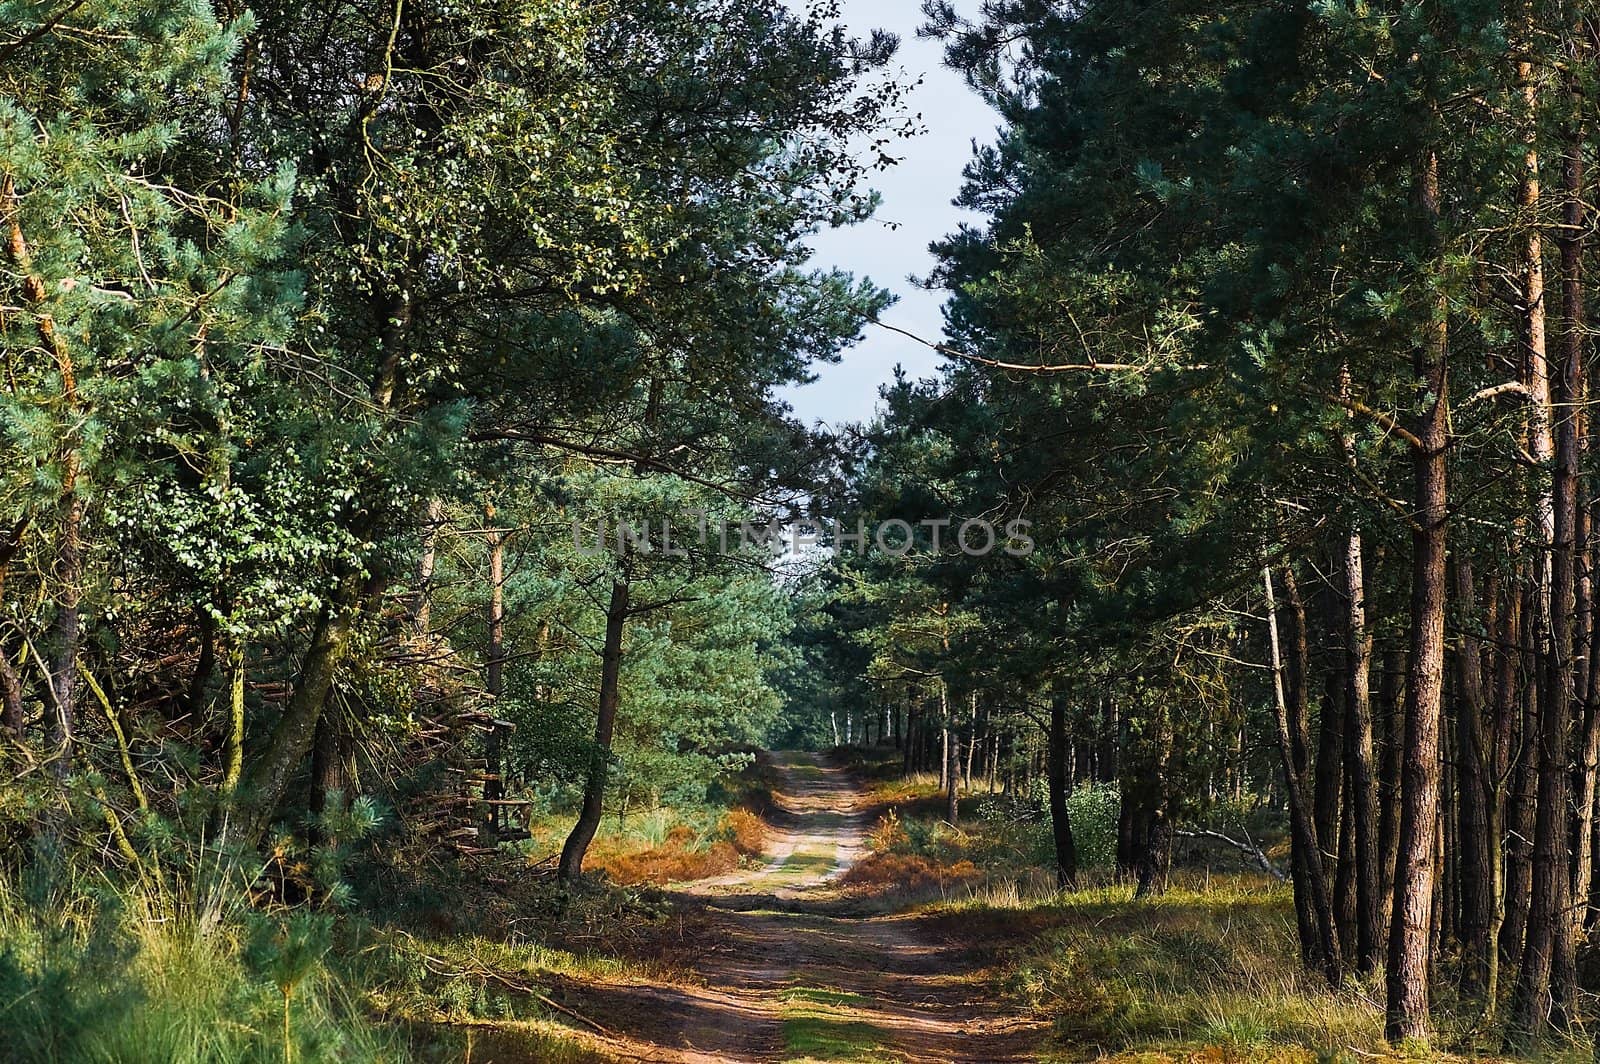 Path in the forest - horizontal image by Colette